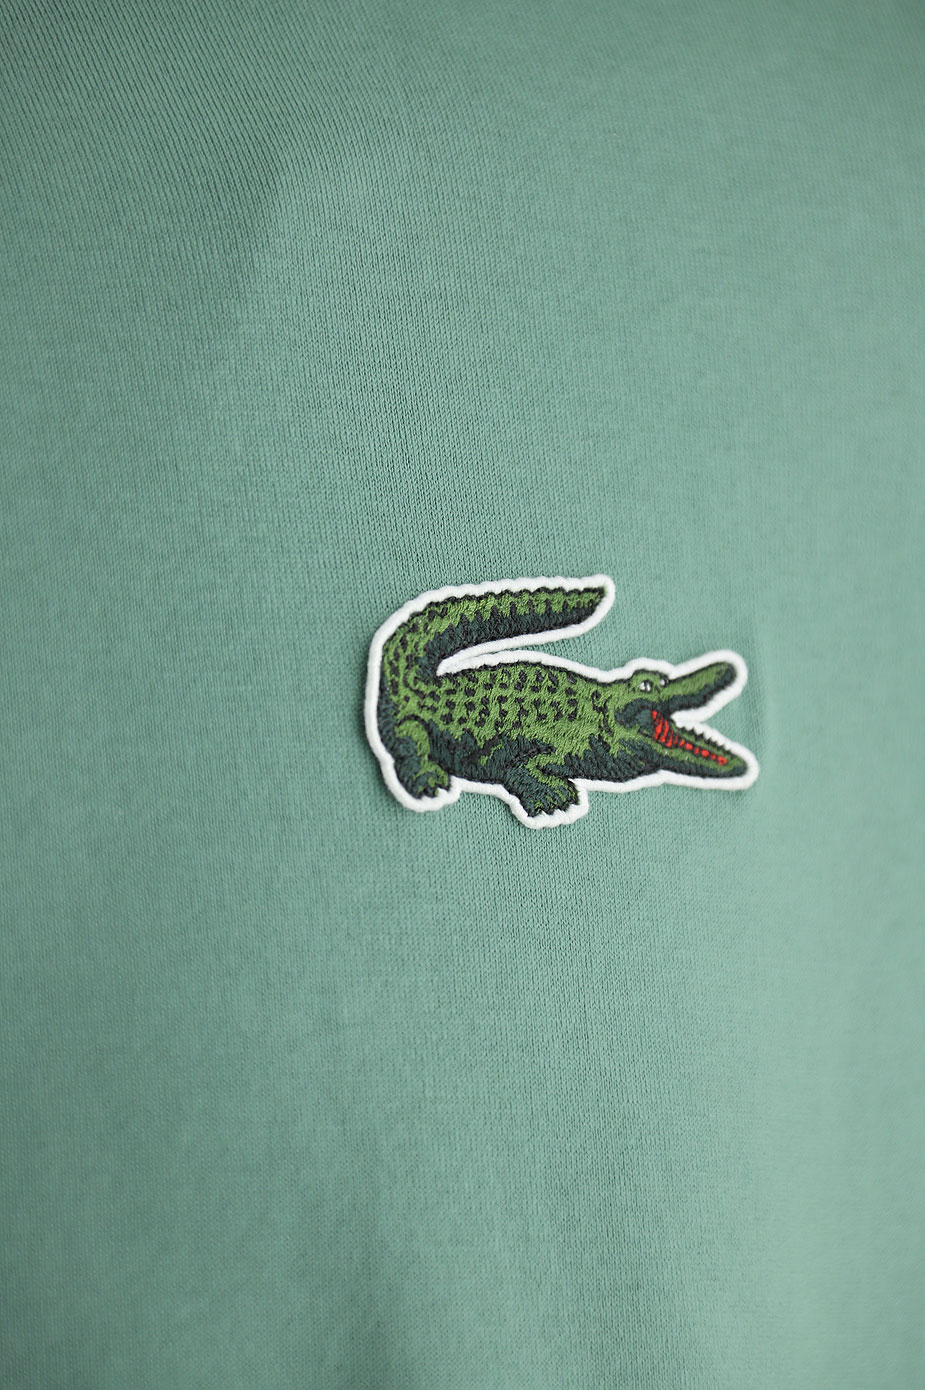 Mens Clothing Lacoste, Style code: th0062-kx5-